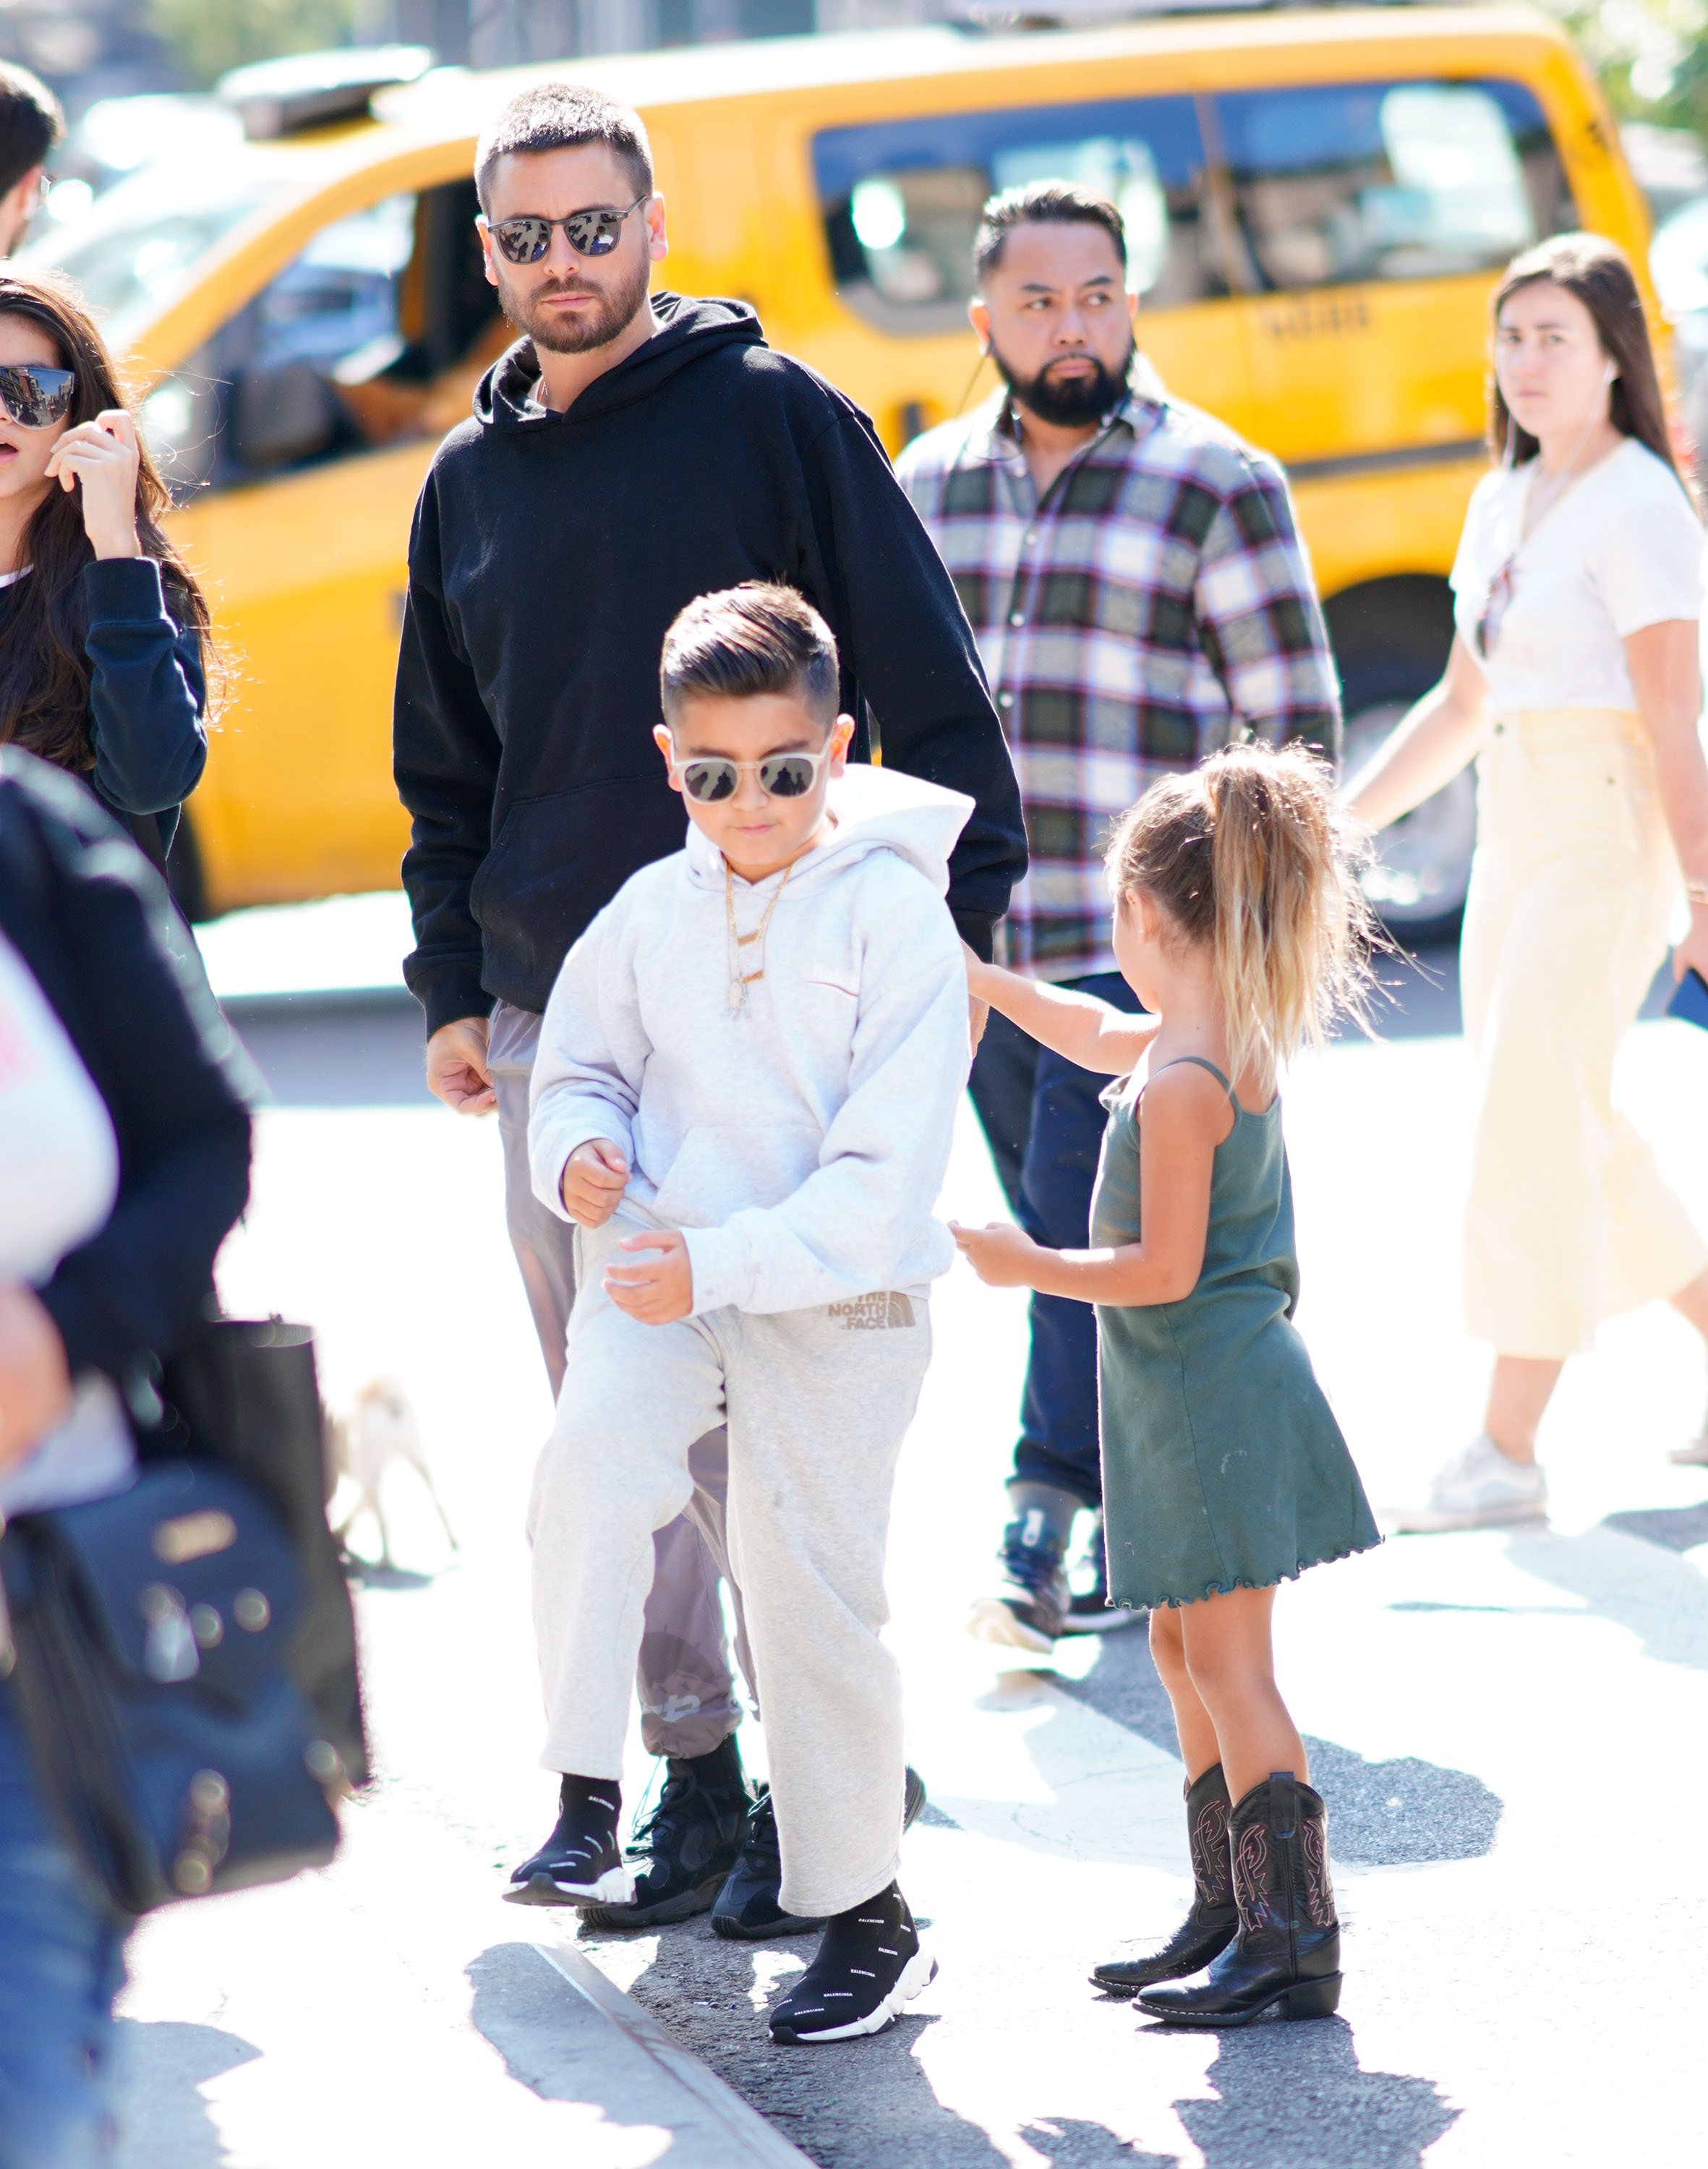 Scott Disick and Kourtney Kardashian take their kids Mason, Penelope, and Reign to lunch on September 30, 2018 in New York City. | Source: Getty Images